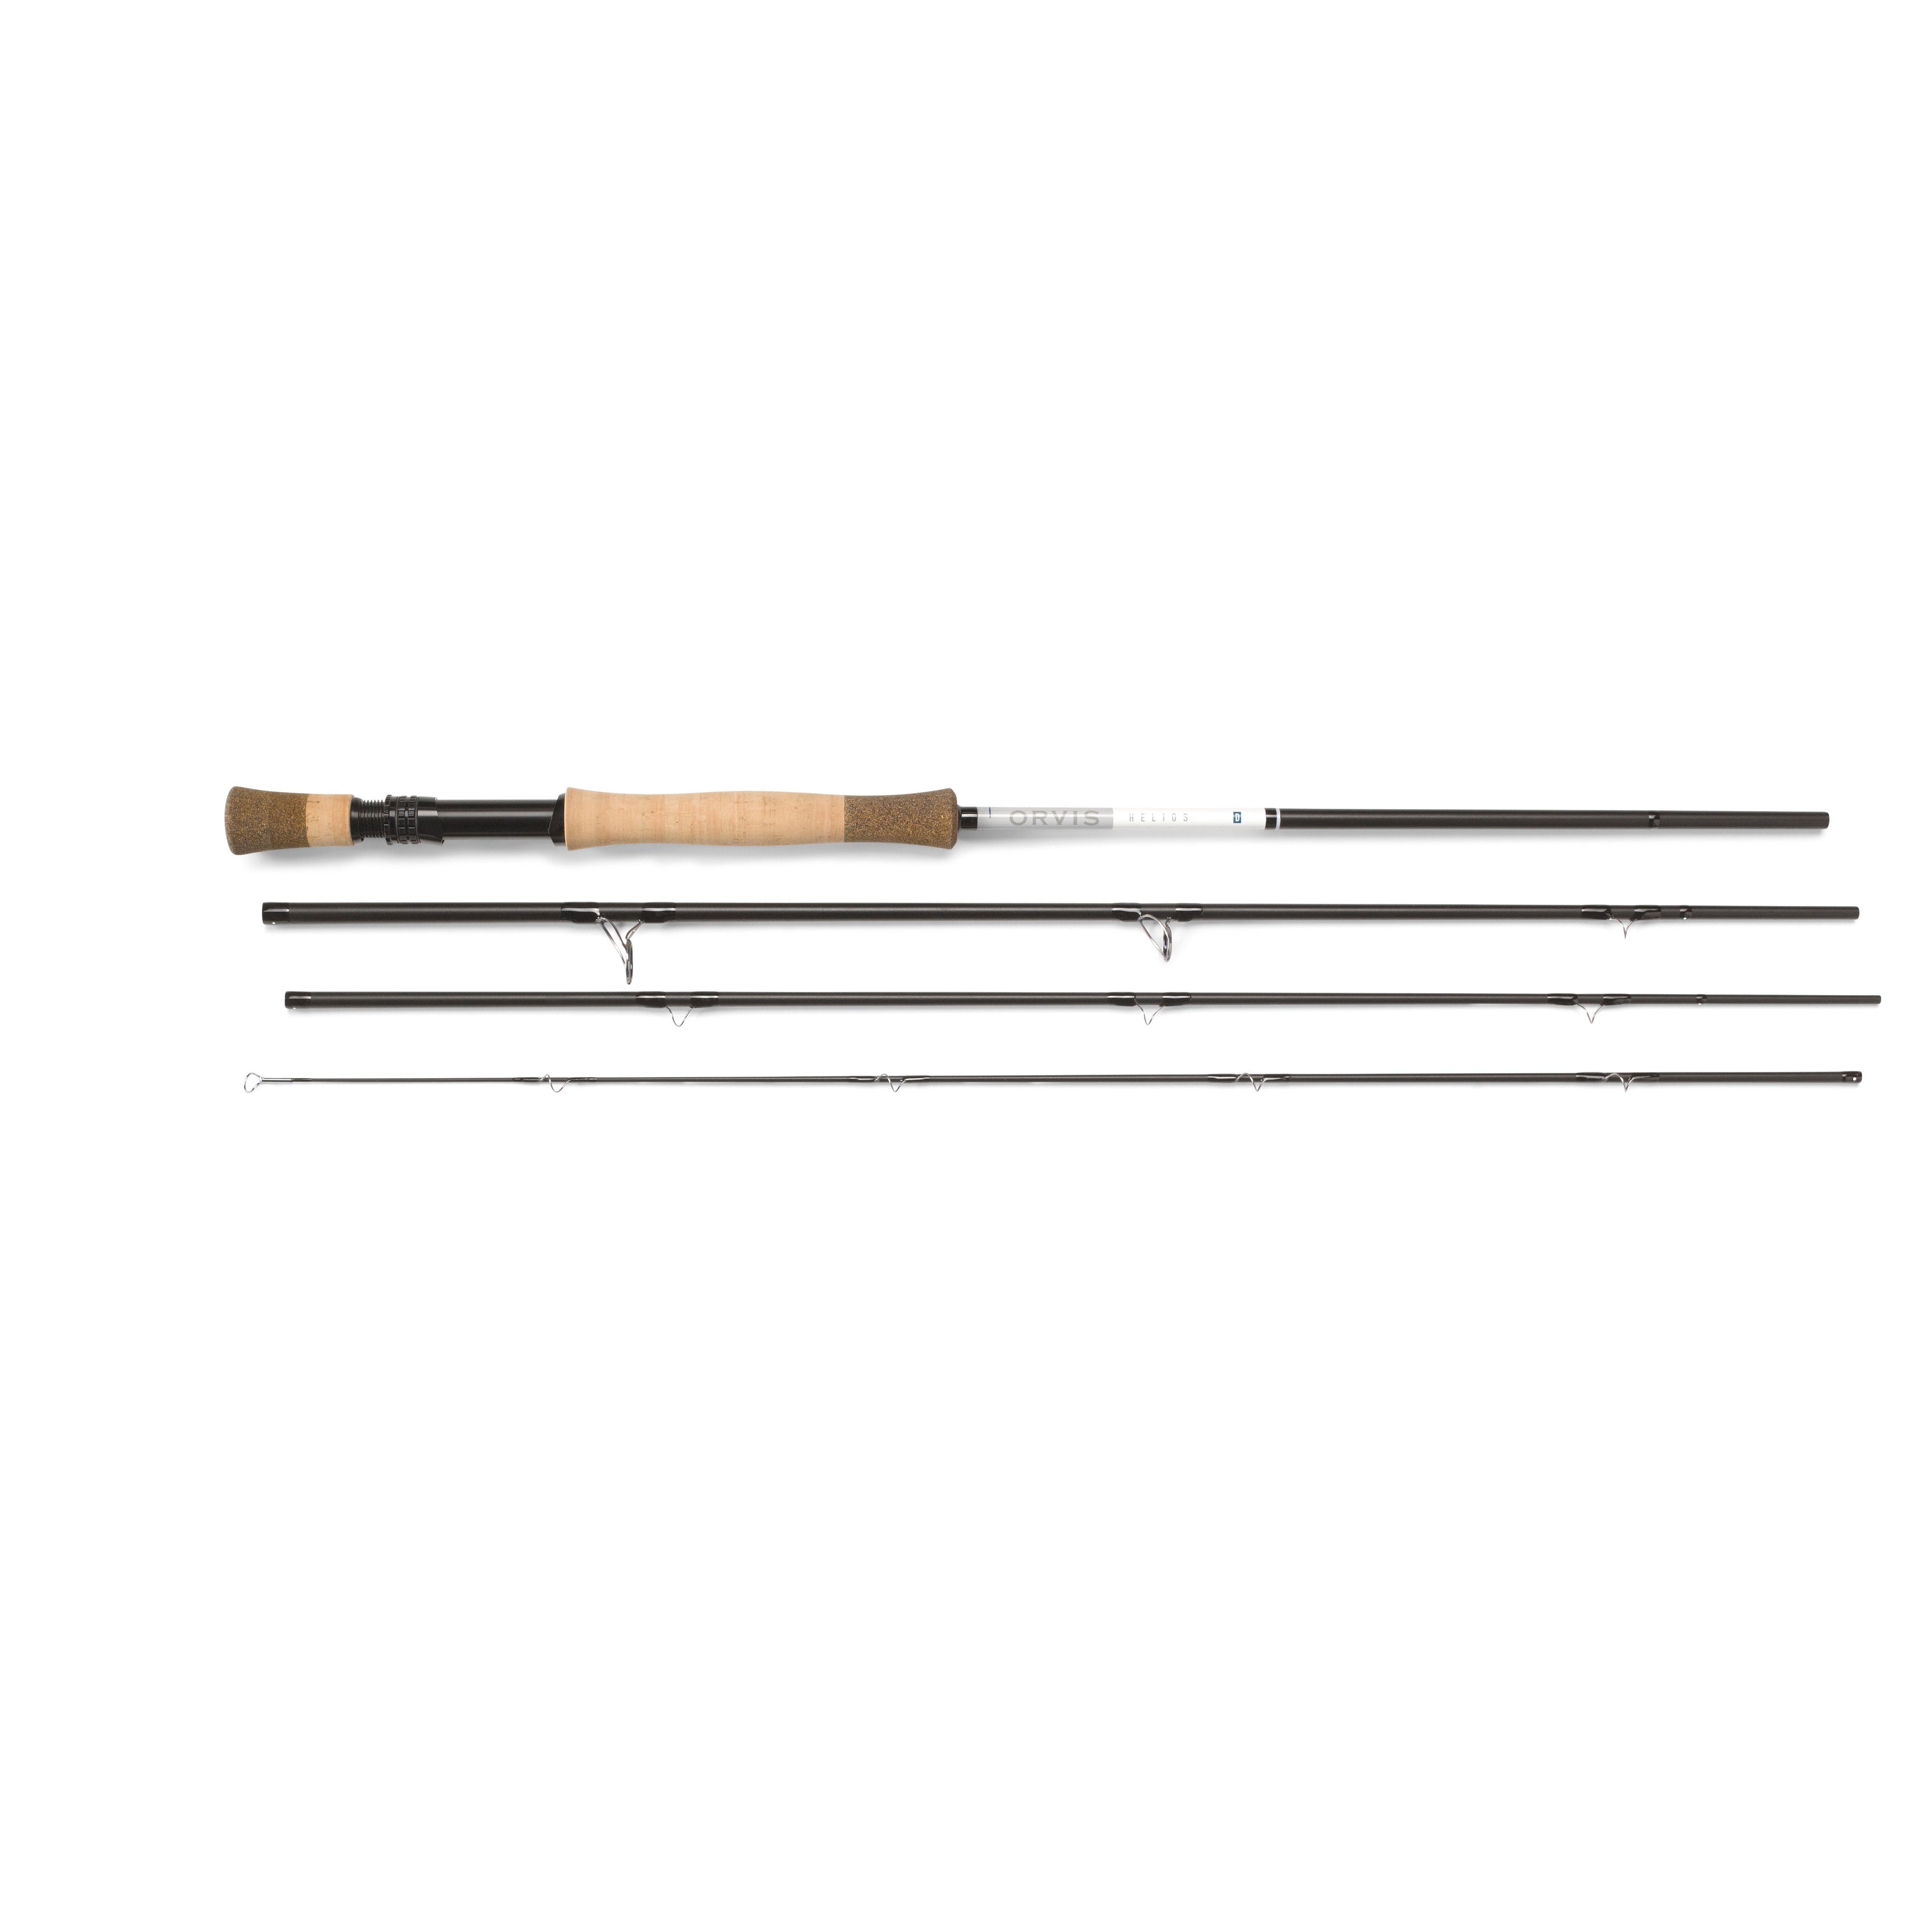 Orvis Helios Big Game Fly Rod Series Product Overview 